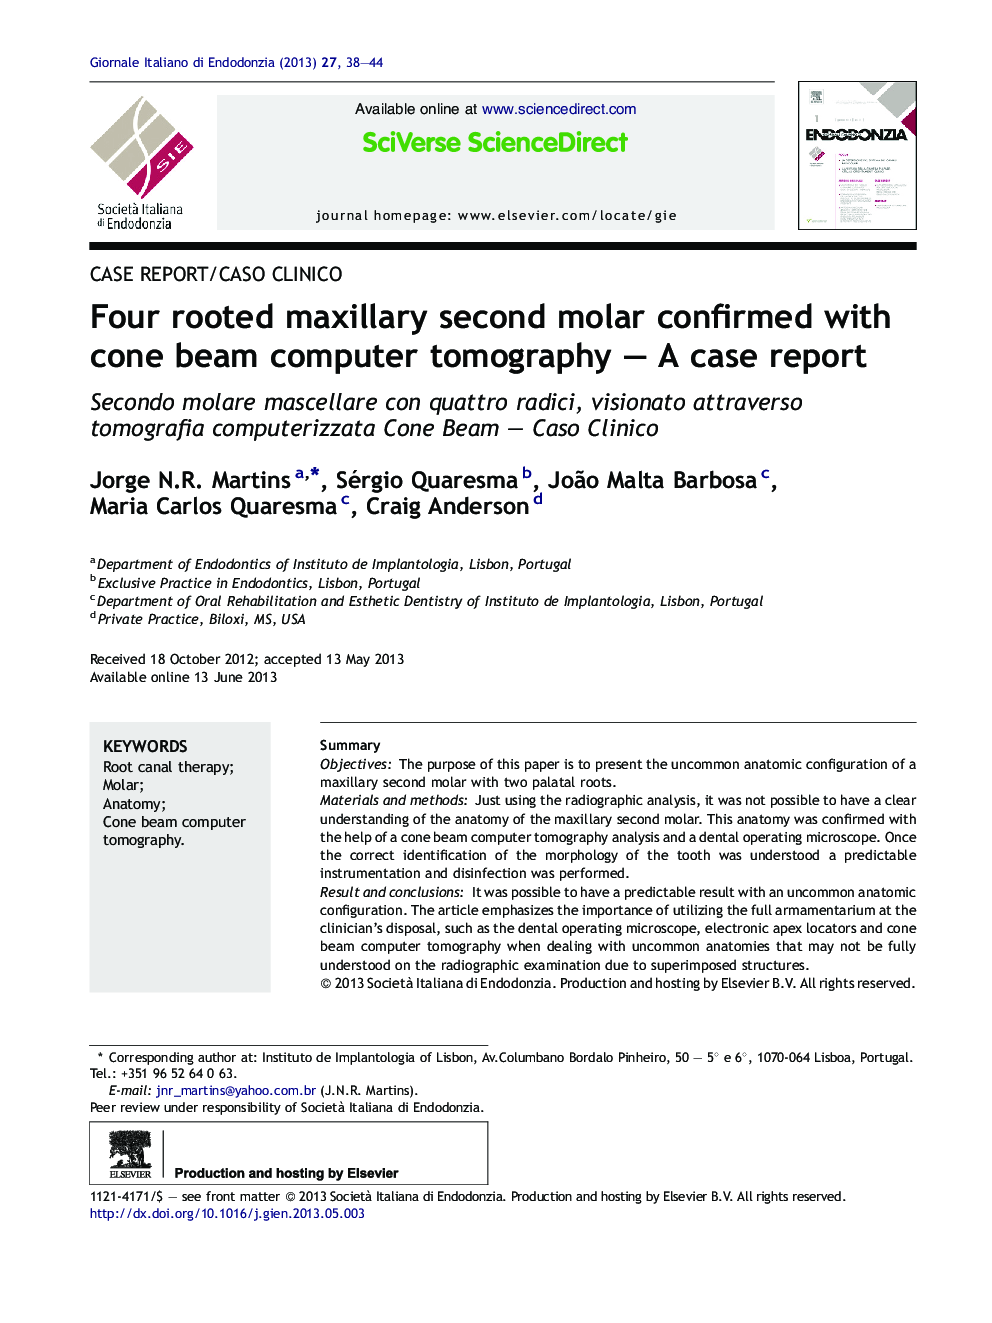 Four rooted maxillary second molar confirmed with cone beam computer tomography – A case report 